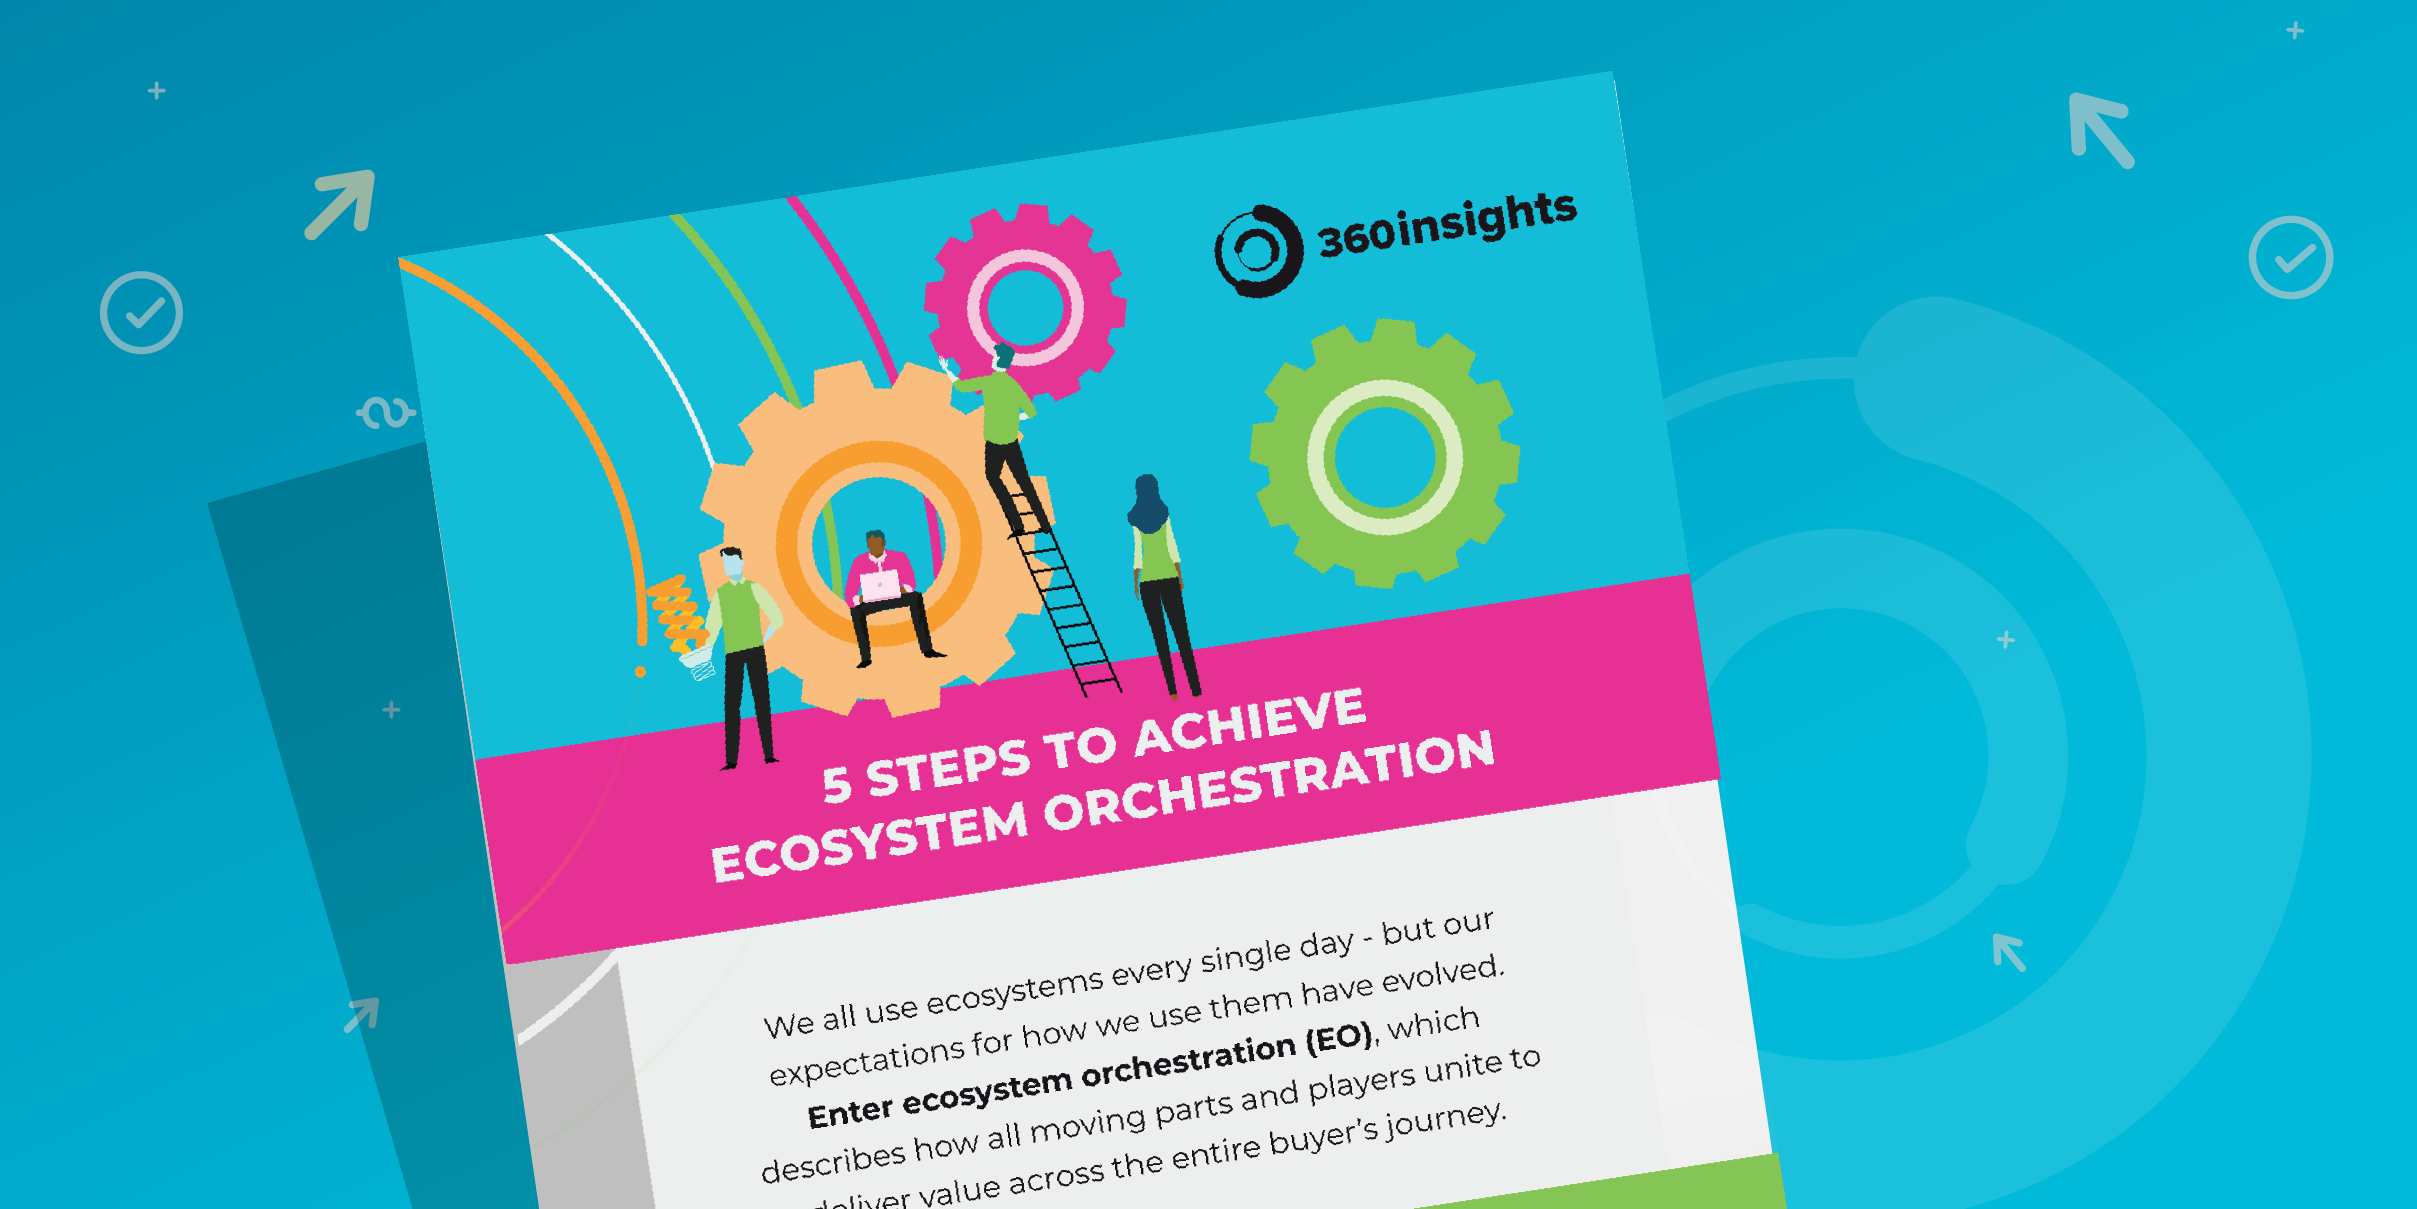 Infographic about 5 steps you can take to achieve ecosystem orchestration